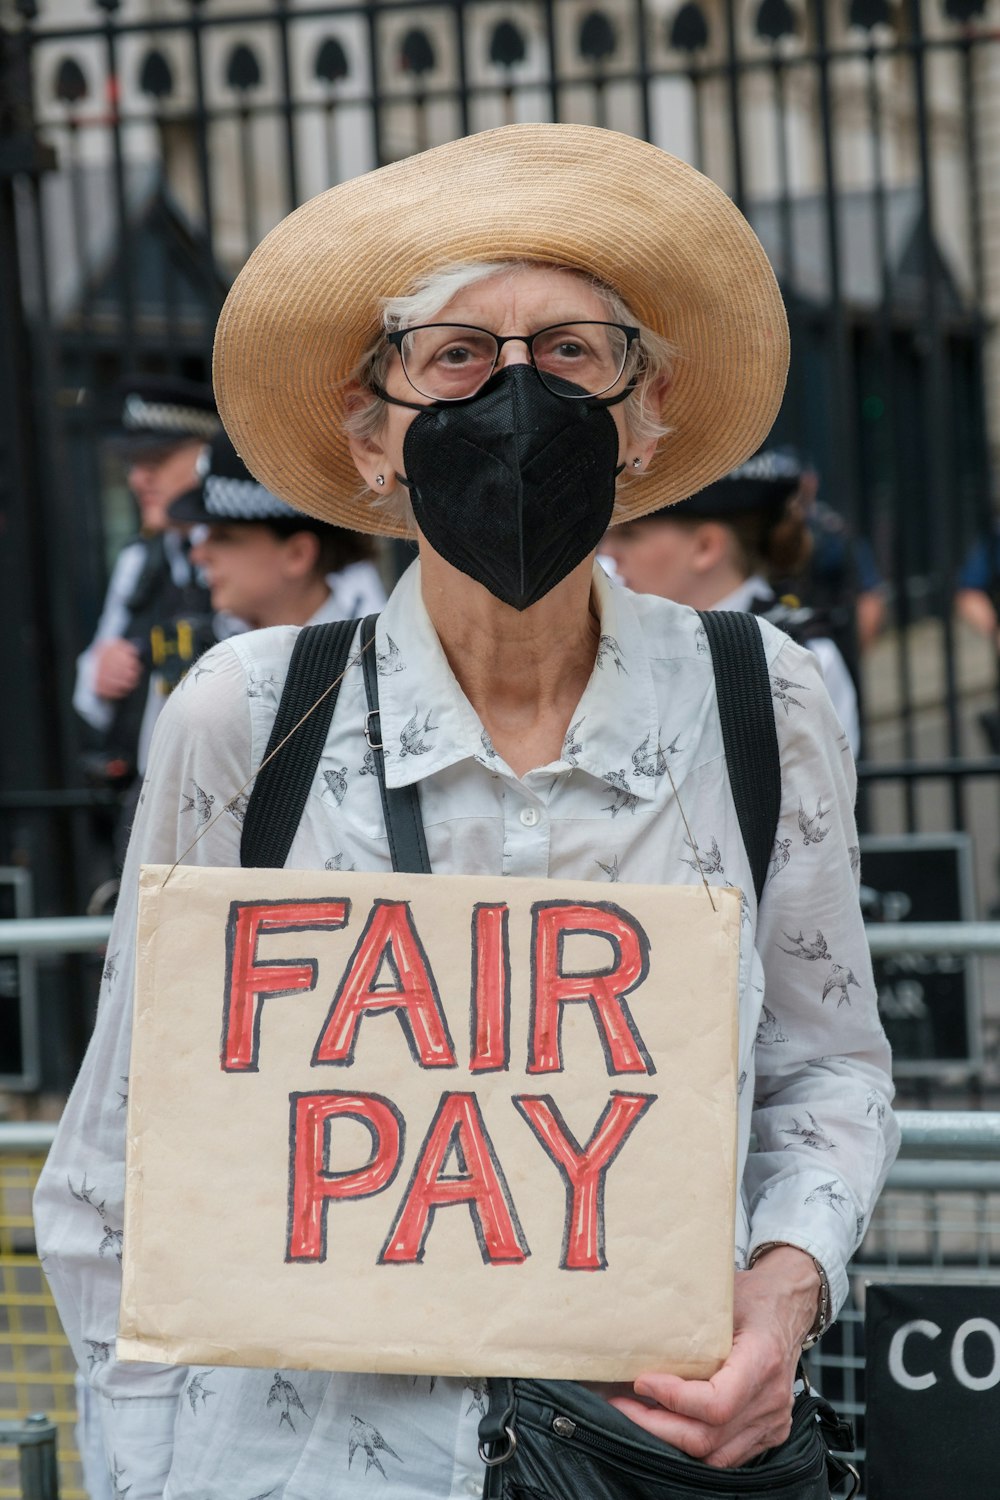 a man wearing a hat and holding a sign